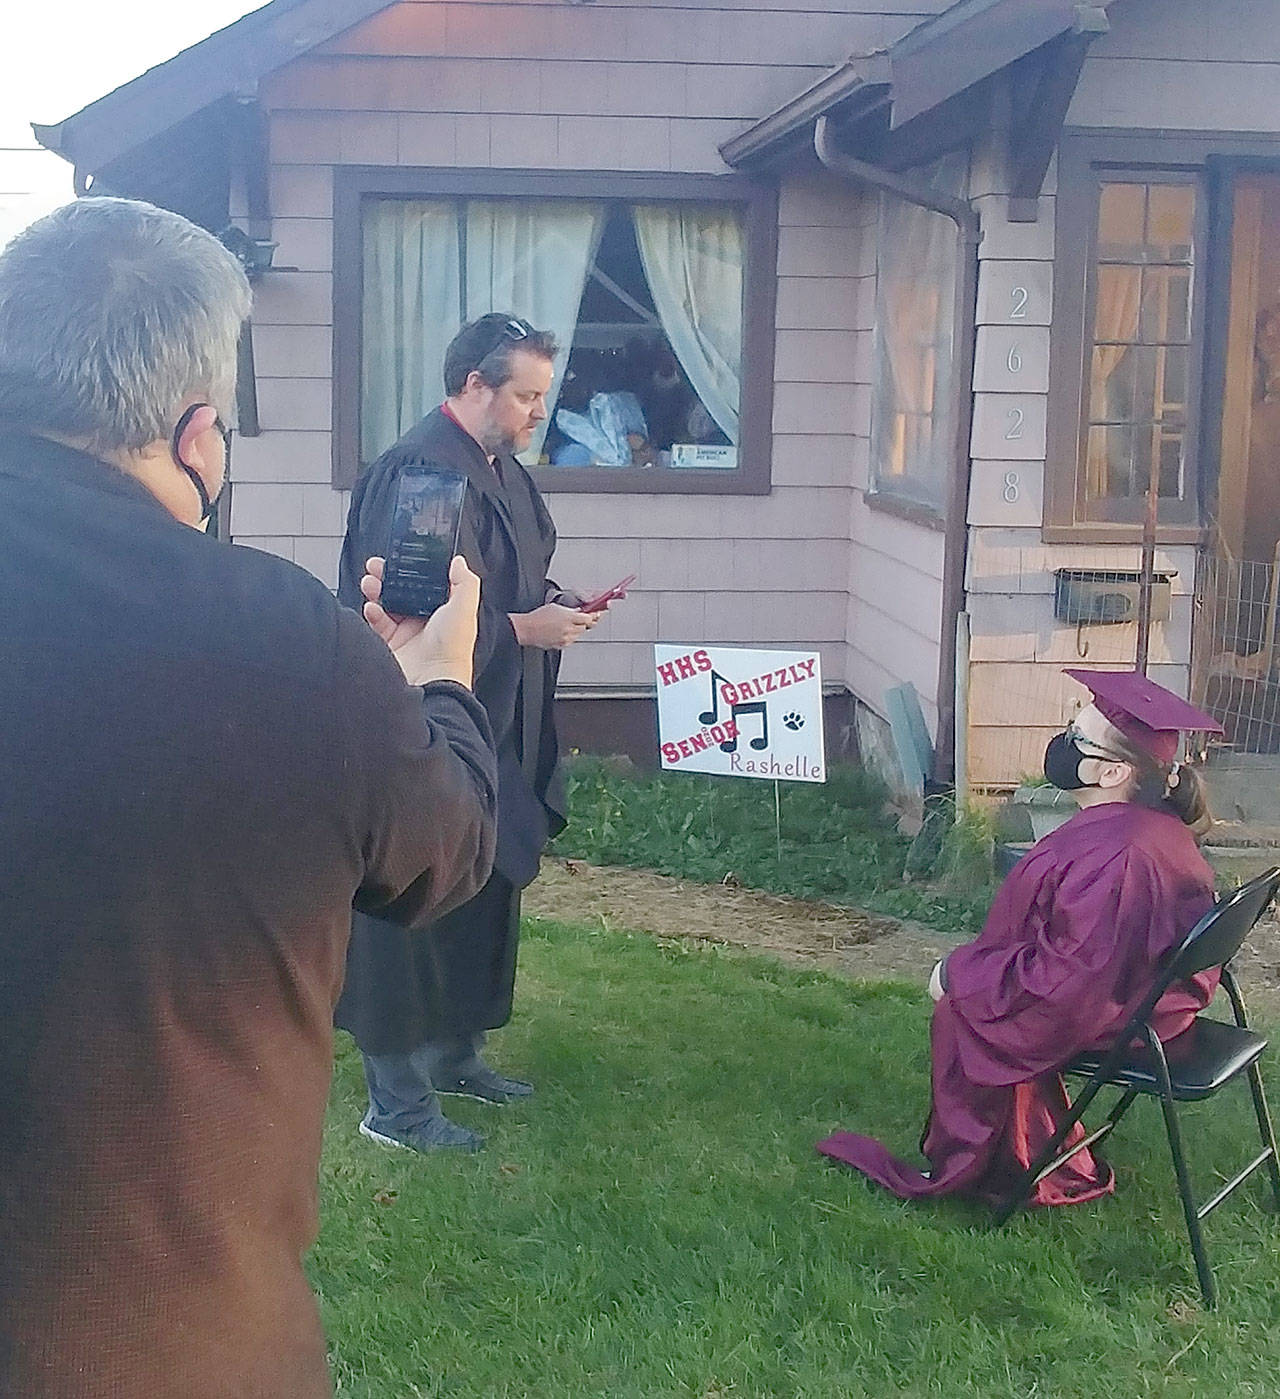 Lin Messerer photo                                Hoquiam High School Principal Brock Maxwell conducts a mini graduation ceremony for senior Rashelle Bates on her front lawn as her mother, Rhea Abbott, watches from her bed inside.